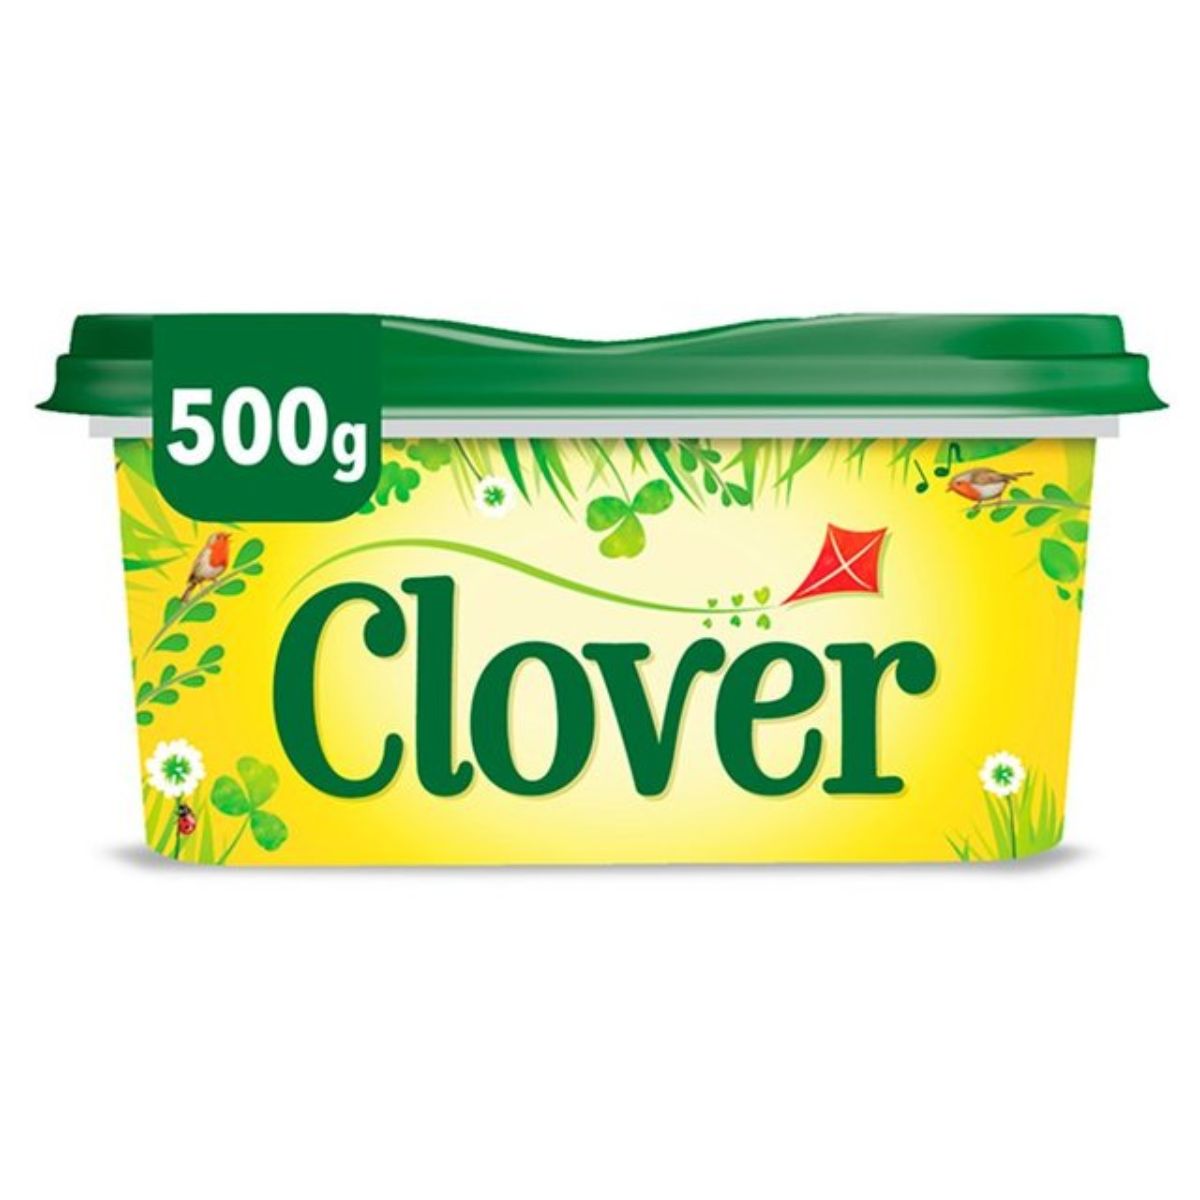 Clover - Spread - 500g tub on a white background.